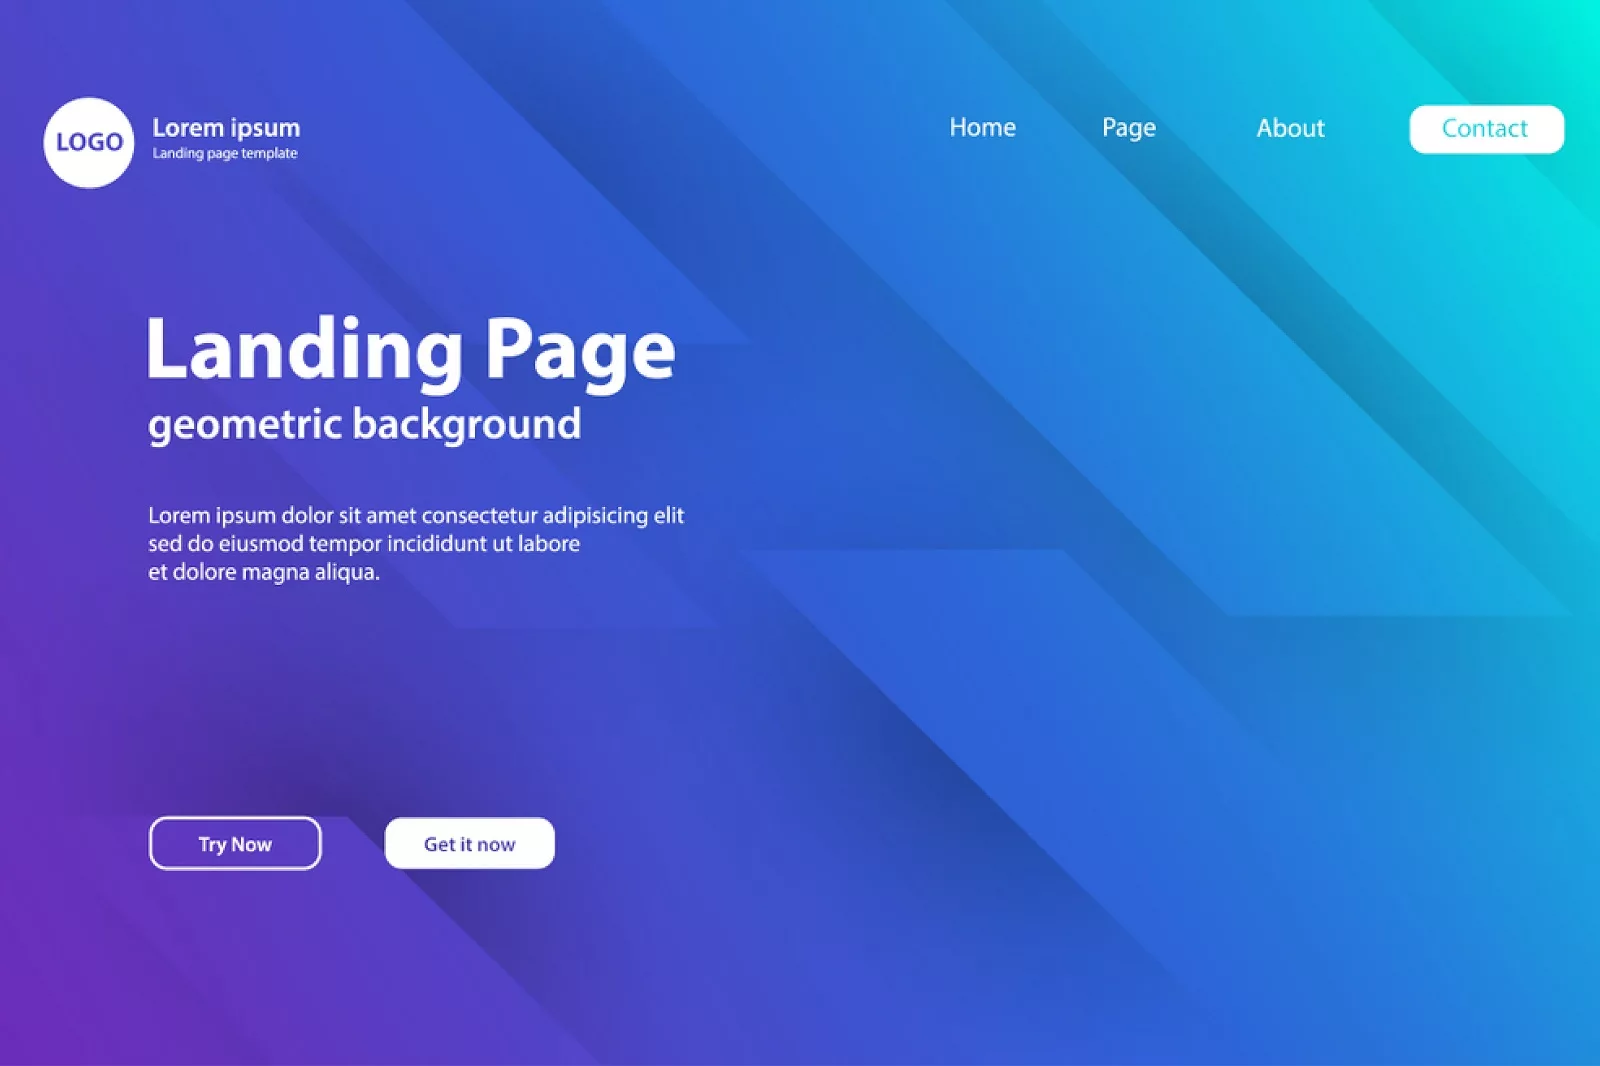 Top landing page design that retains customers